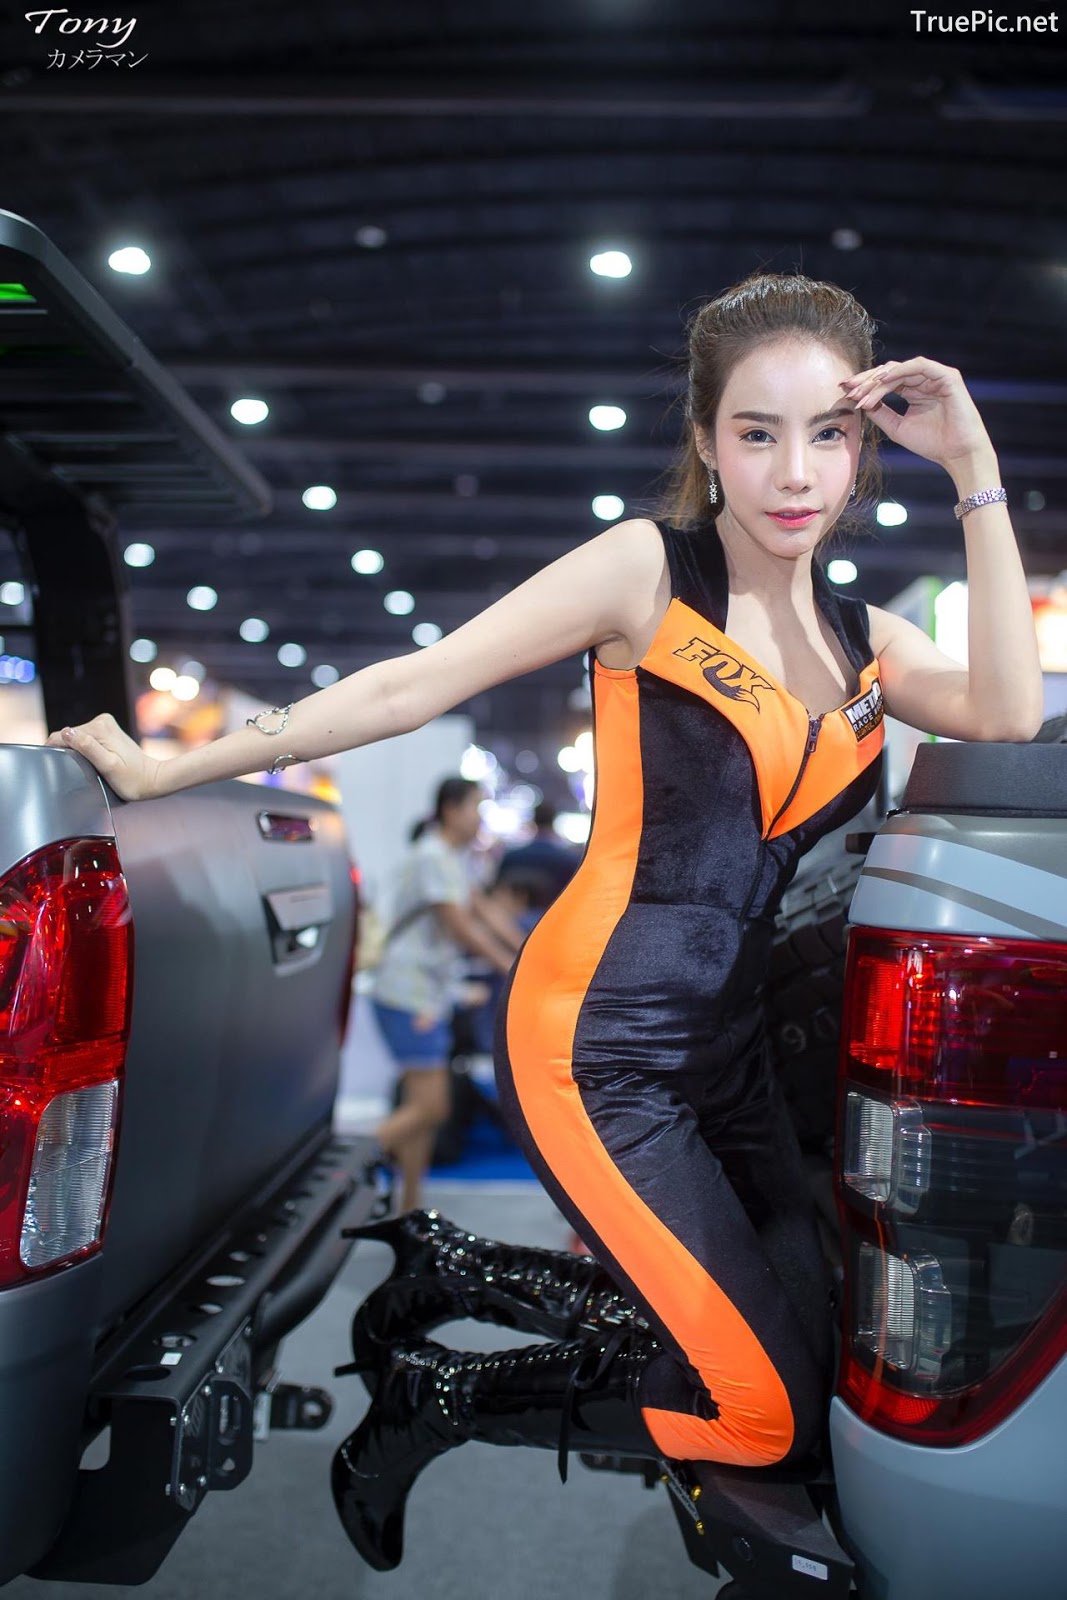 Image-Thailand-Hot-Model-Thai-Racing-Girl-At-Motor-Expo-2018-TruePic.net- Picture-109